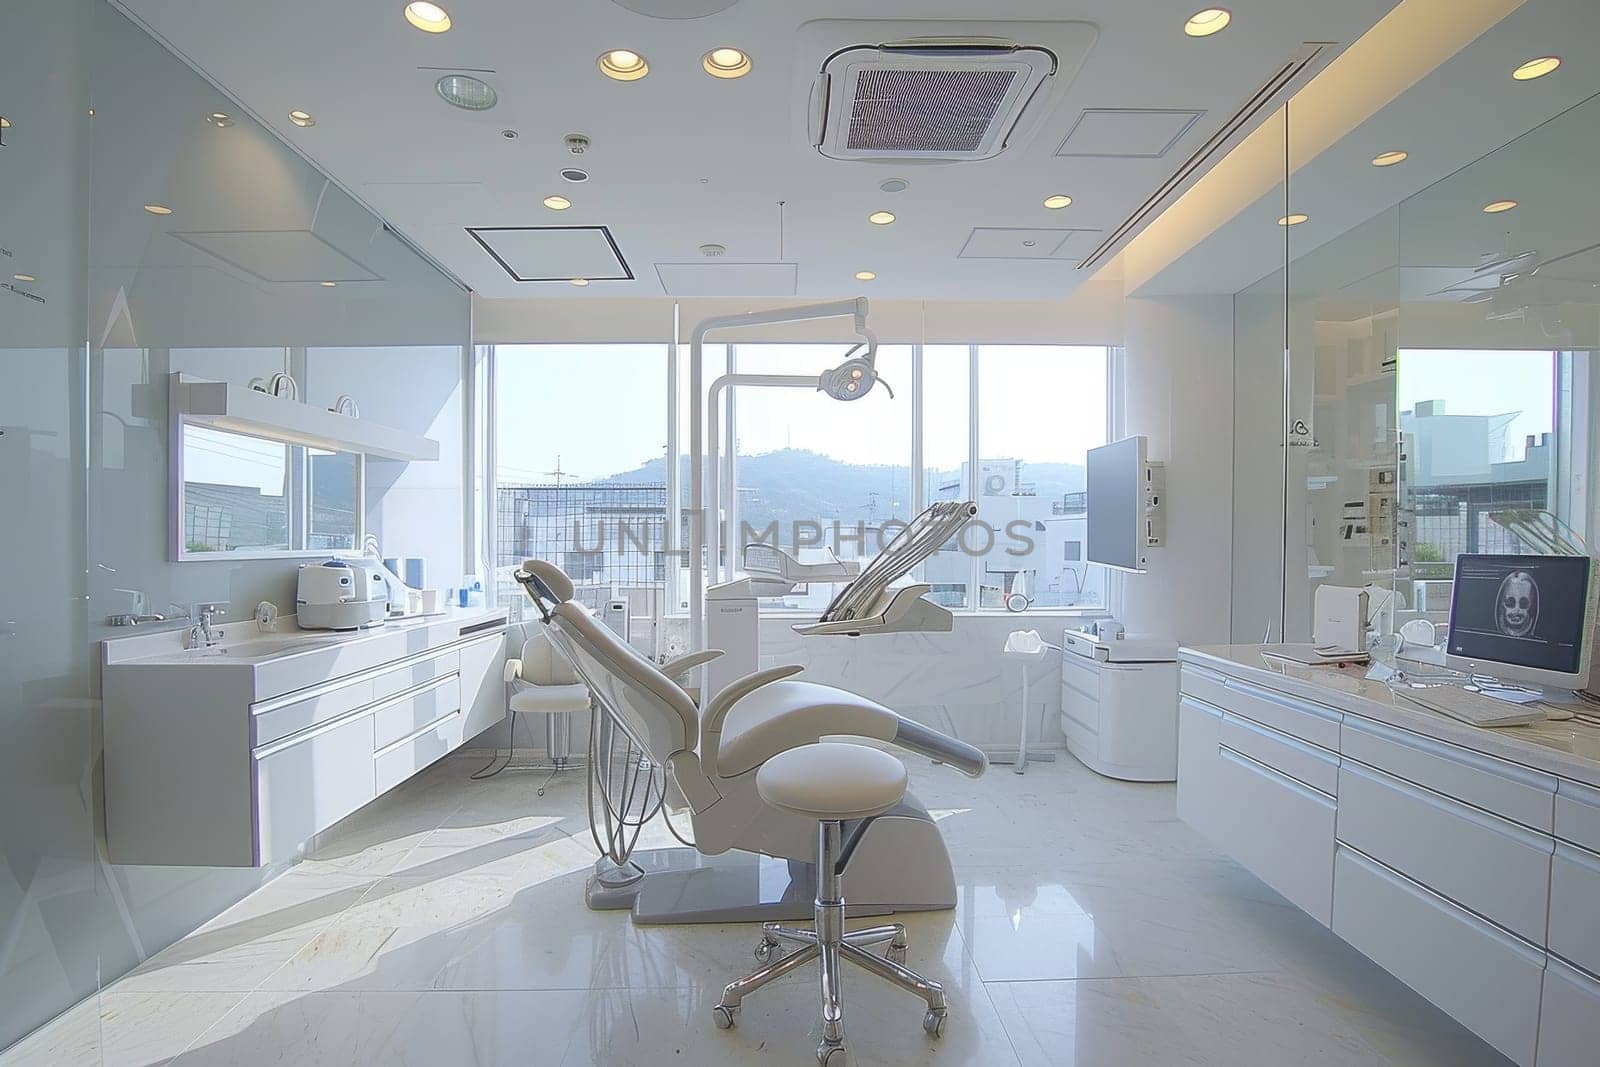 A clean and sterile dental office with a large window overlooking a mountain. The room is filled with white furniture and equipment, including a dental chair and a computer. The atmosphere is calm